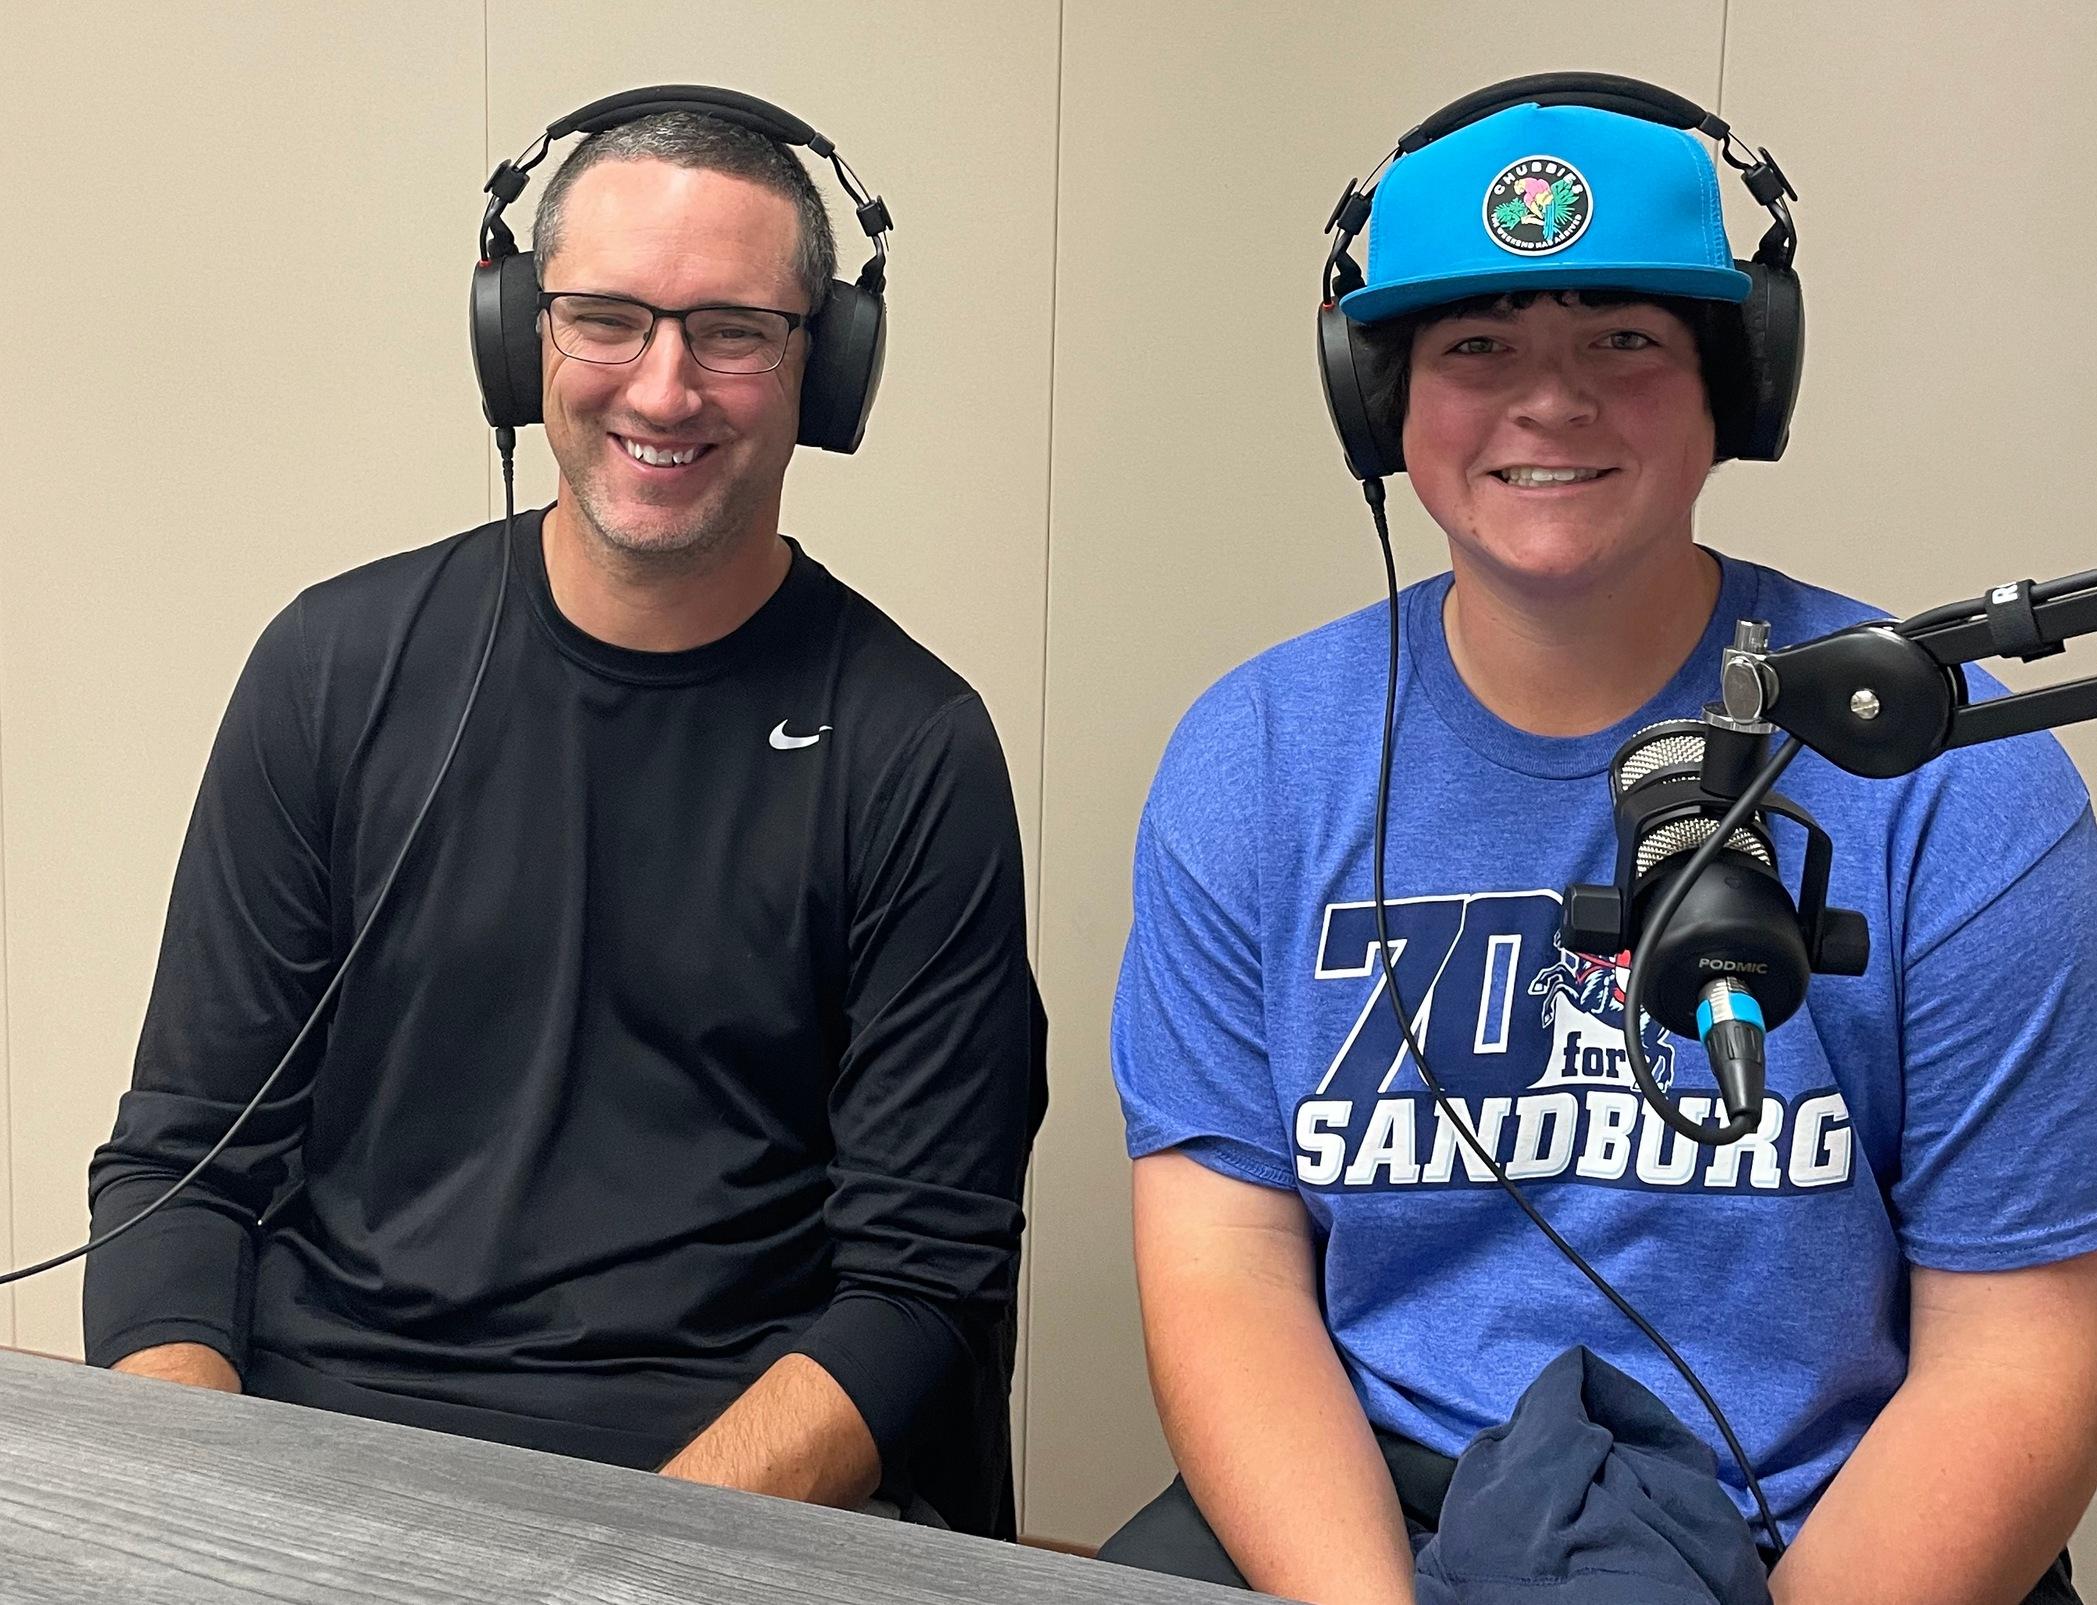 Ryan Twaddle (left) and Tyler Picken (right) were the guests for Episode 18 of the Sandburg Athletics Podcast.